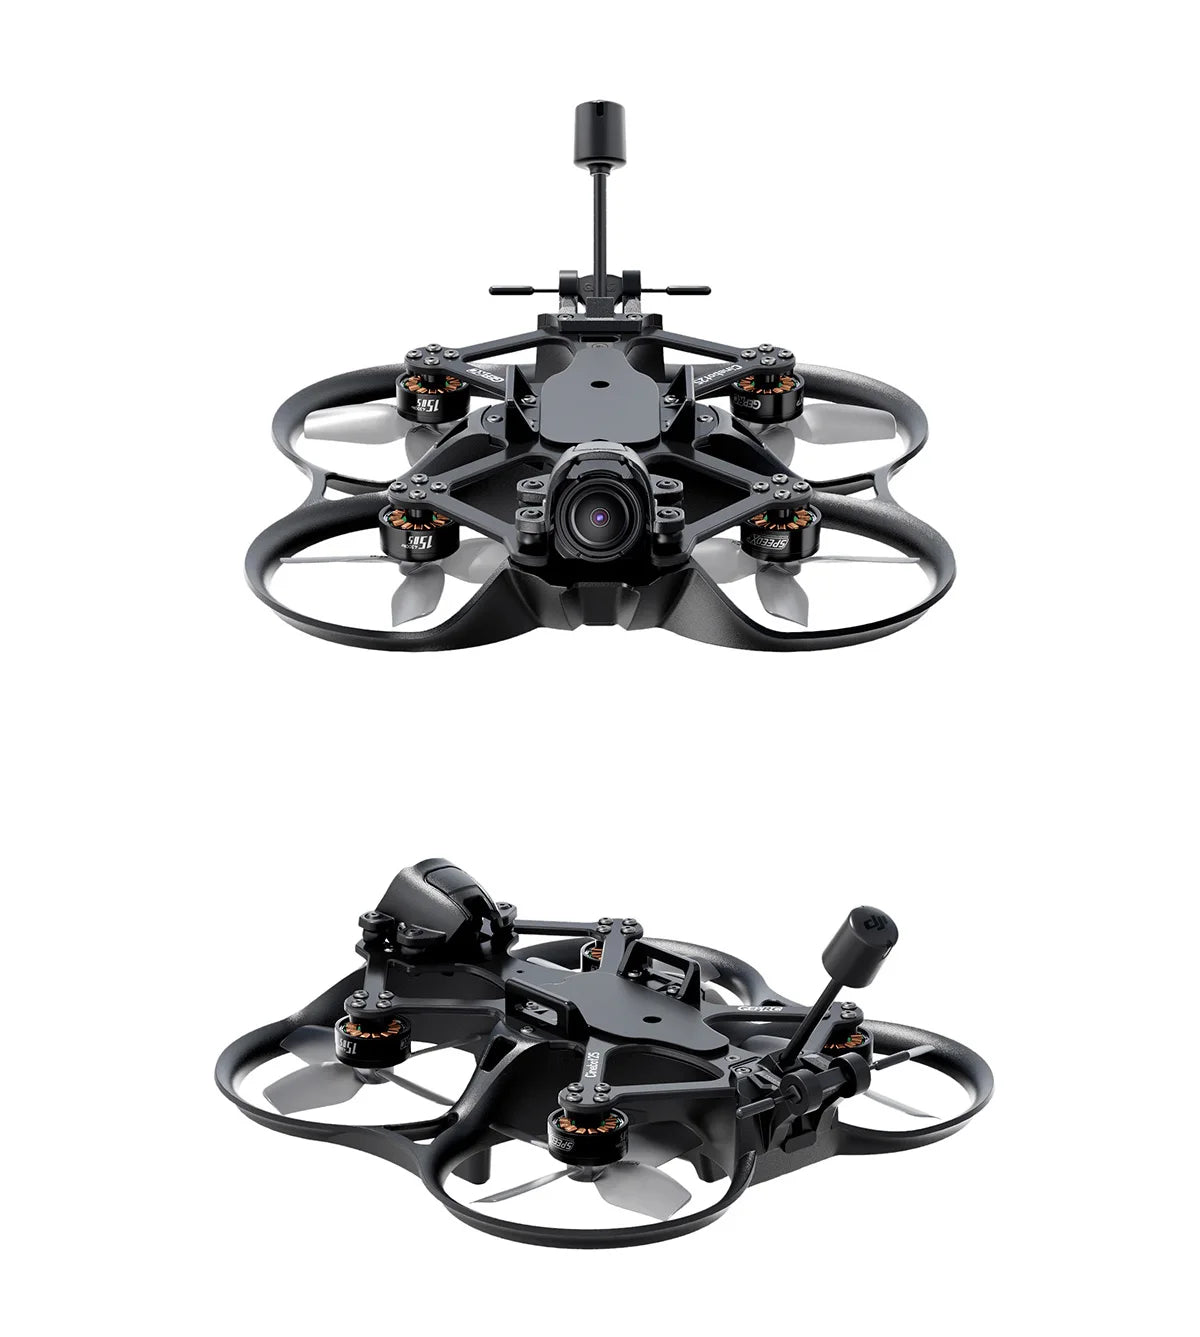 GEPRC Cinebot25 S HD O3  2.5inch FPV, the model aircraft model has a certain risk,please be sure to operate in a safe